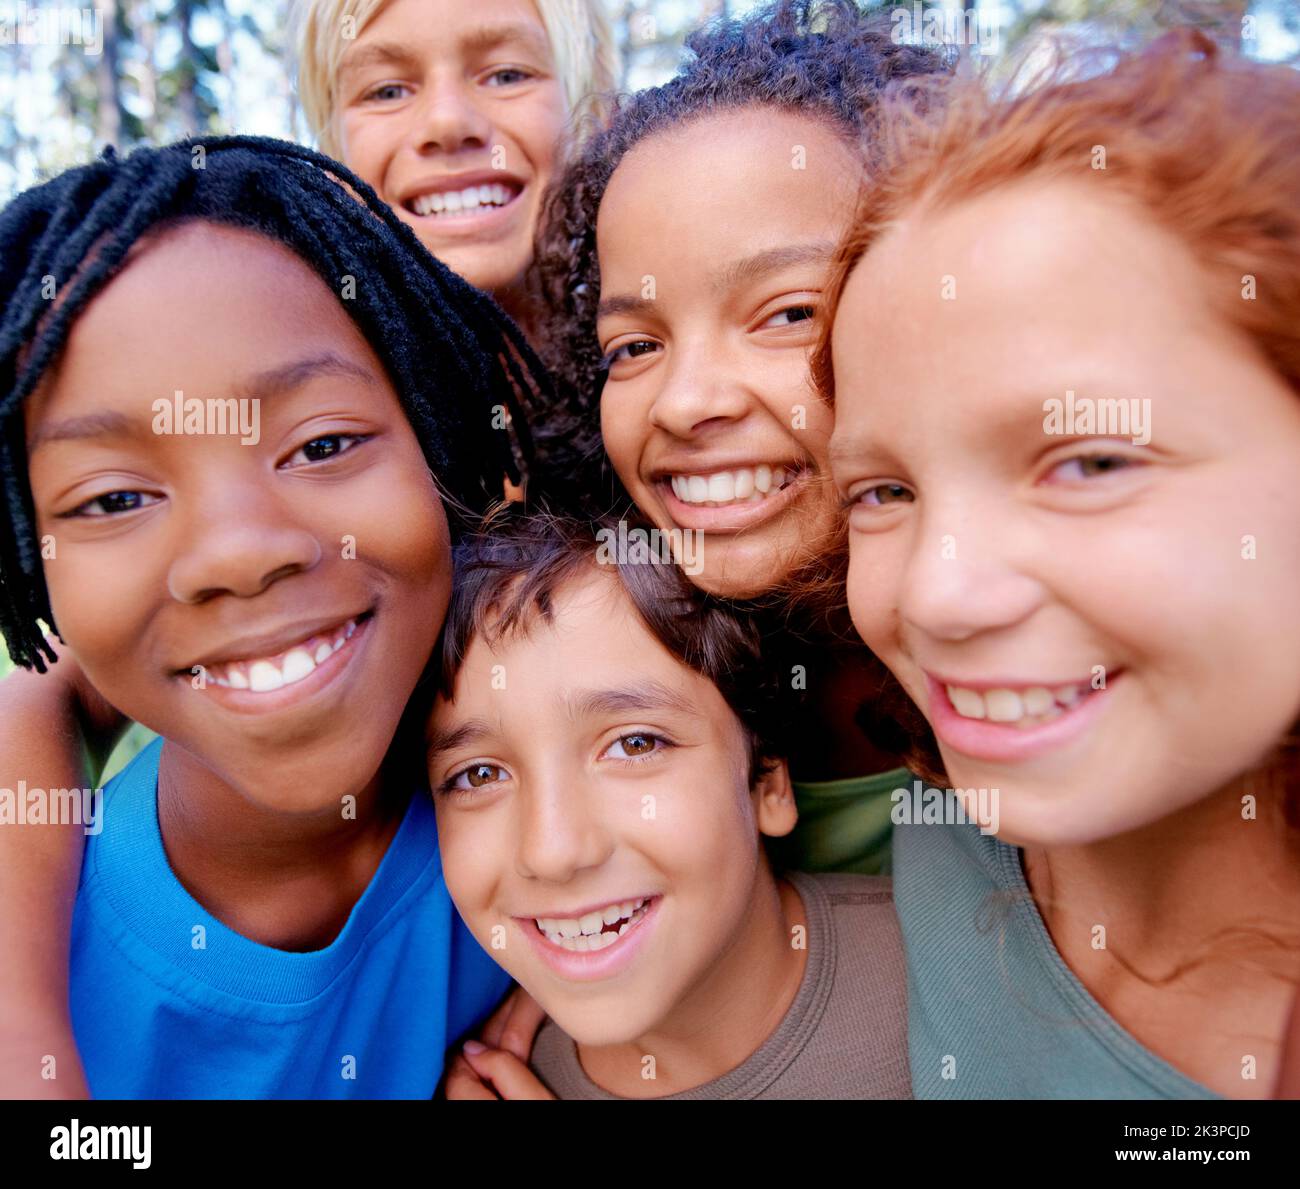 Friends are all you need. Closeup of a group of kids smiling at the camera while standing in the woods. Stock Photo